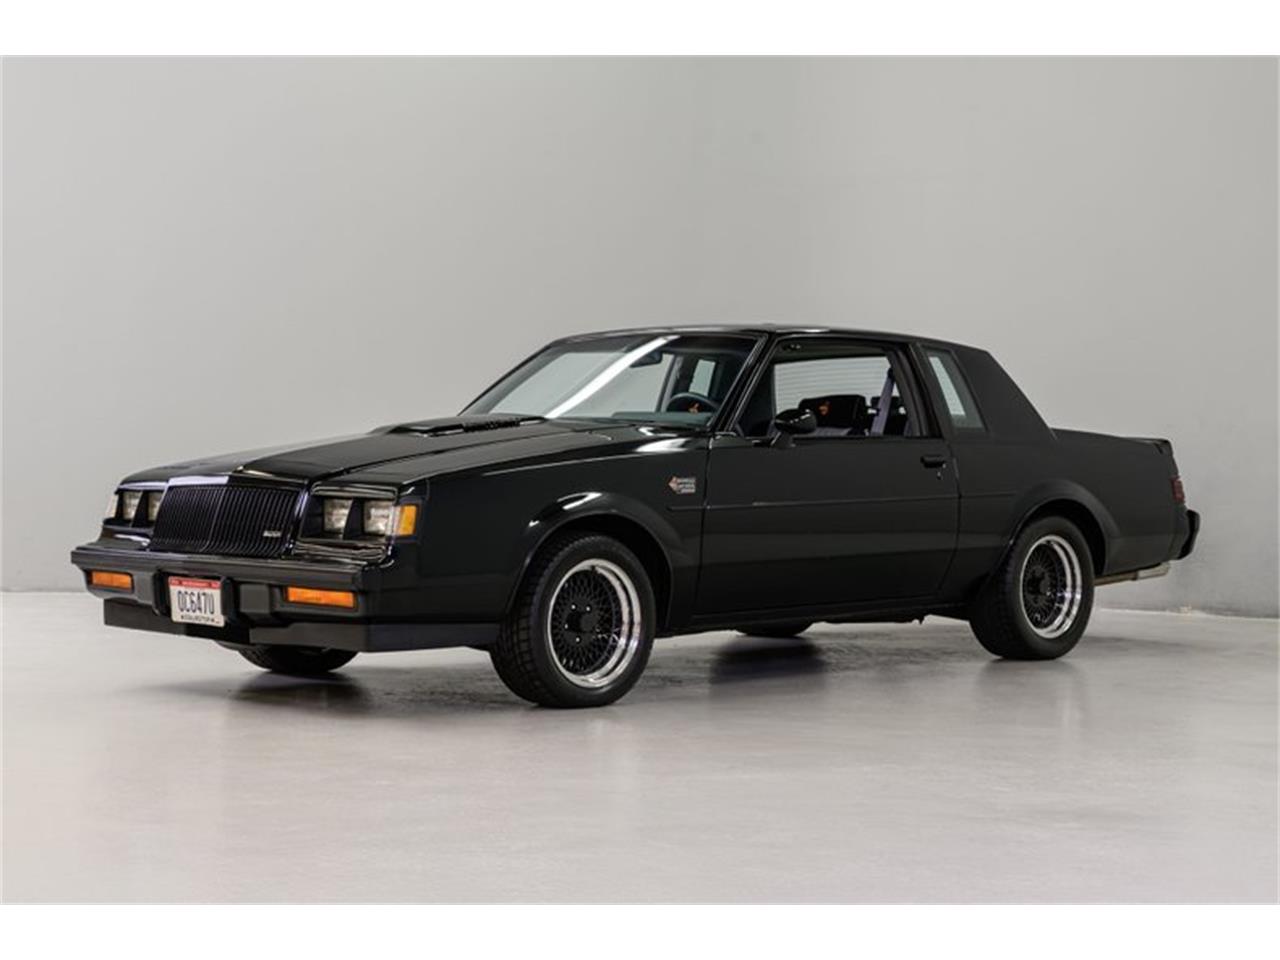 for sale 1987 buick grand national in concord, north carolina for sale in concord, nc